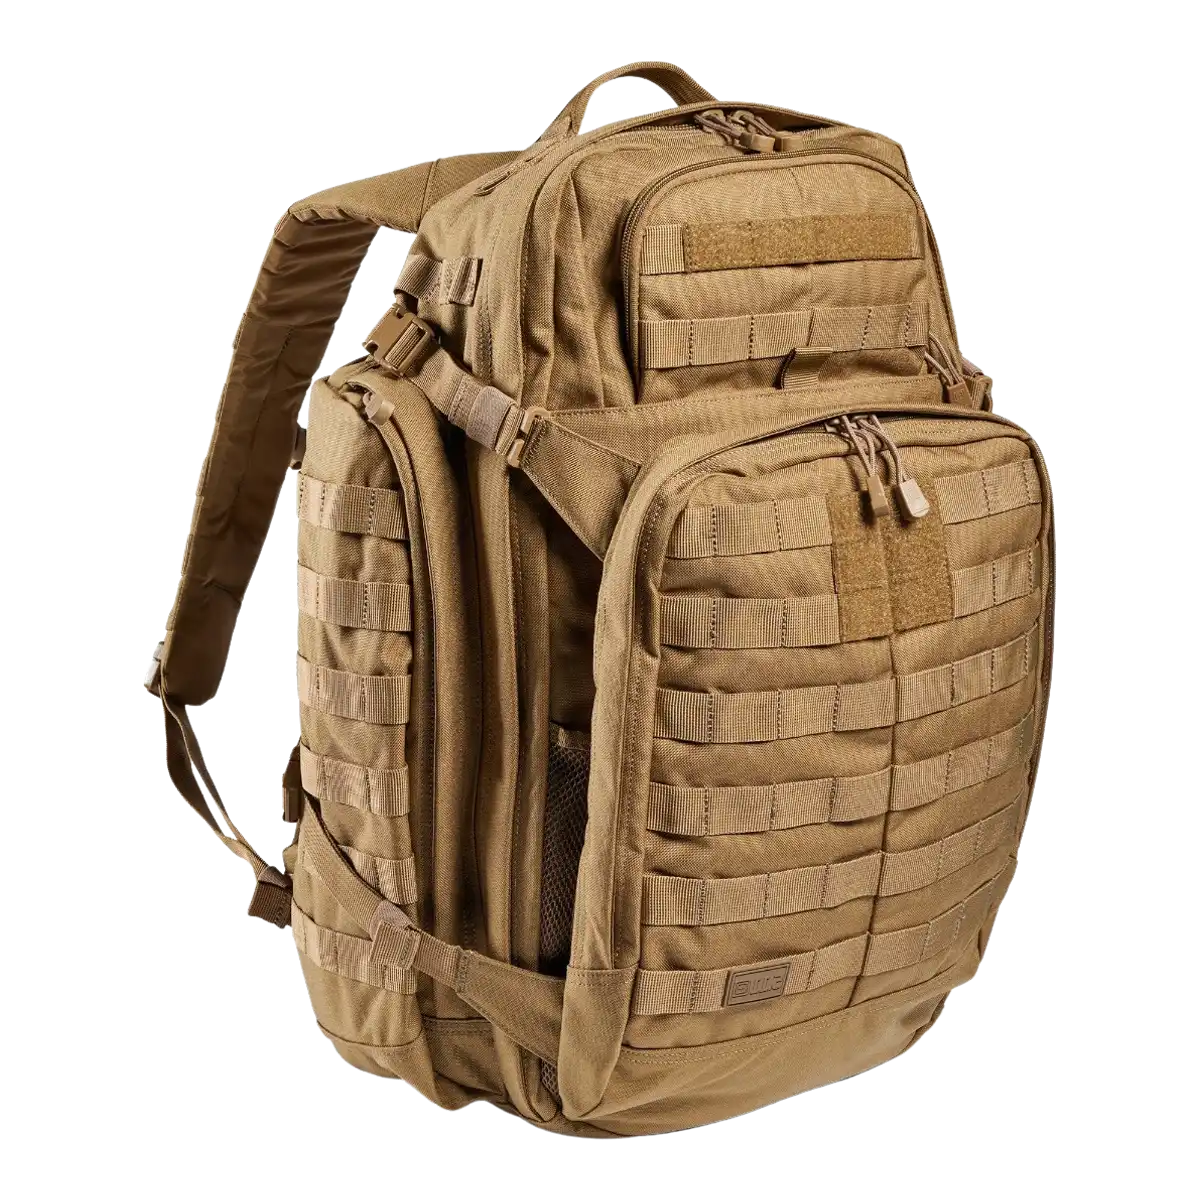 A prominent photograph of a tactical backpack—the model 'Rush 72' by the company 5.11 in the beige khaki color